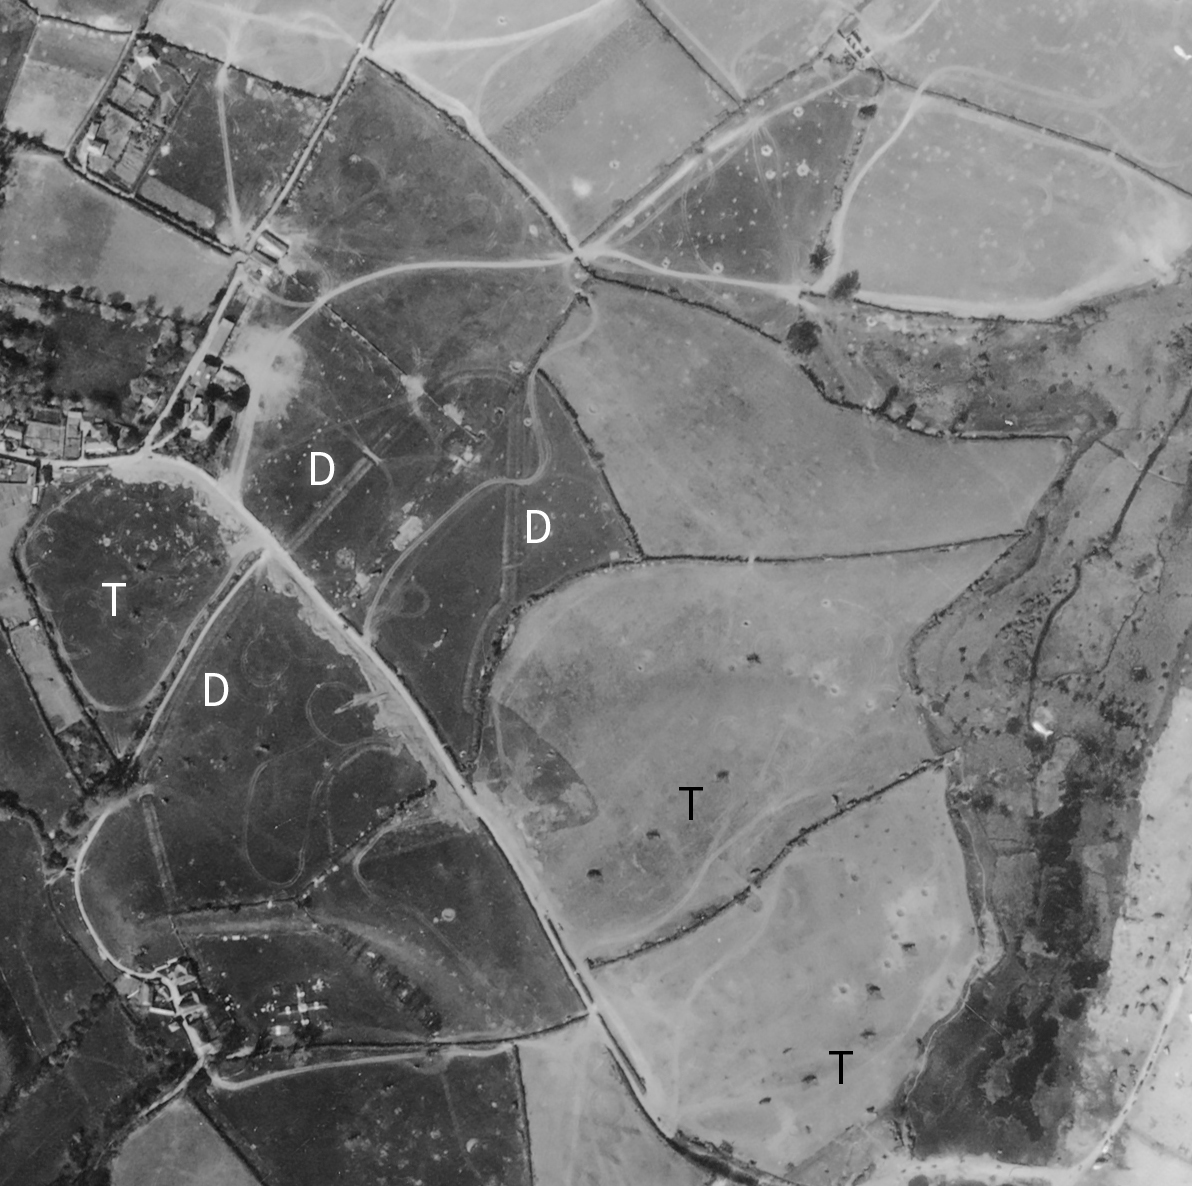 Detail from a black and white vertical photograph, showing a patchwork landscape of fields, hedges, roads and tracks. In the bottom-right corner is a stretch of beach upon which are dotted vehicles at different angles. Towards the top-left of the image is the edge of a settlement. The fields between the beach and the settlement are marked with vehicle tracks and shell holes. The letters 'T' and 'D' applied to the image mark locations.